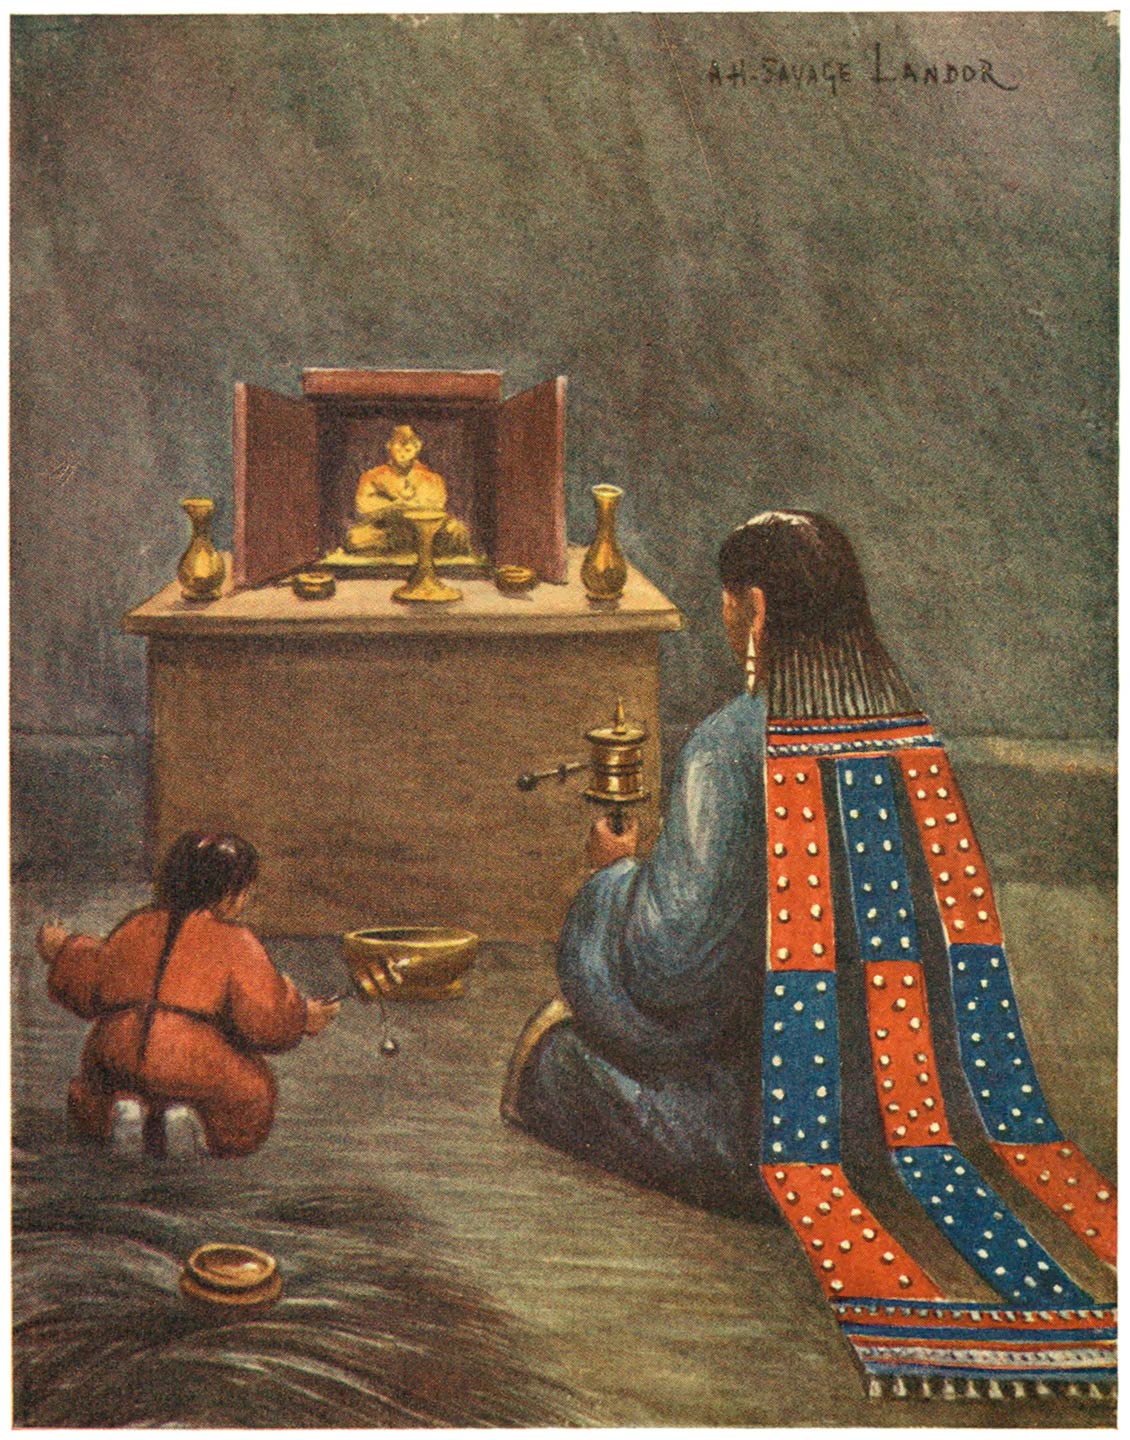 Woman and Child praying before a Shrine inside a Tent